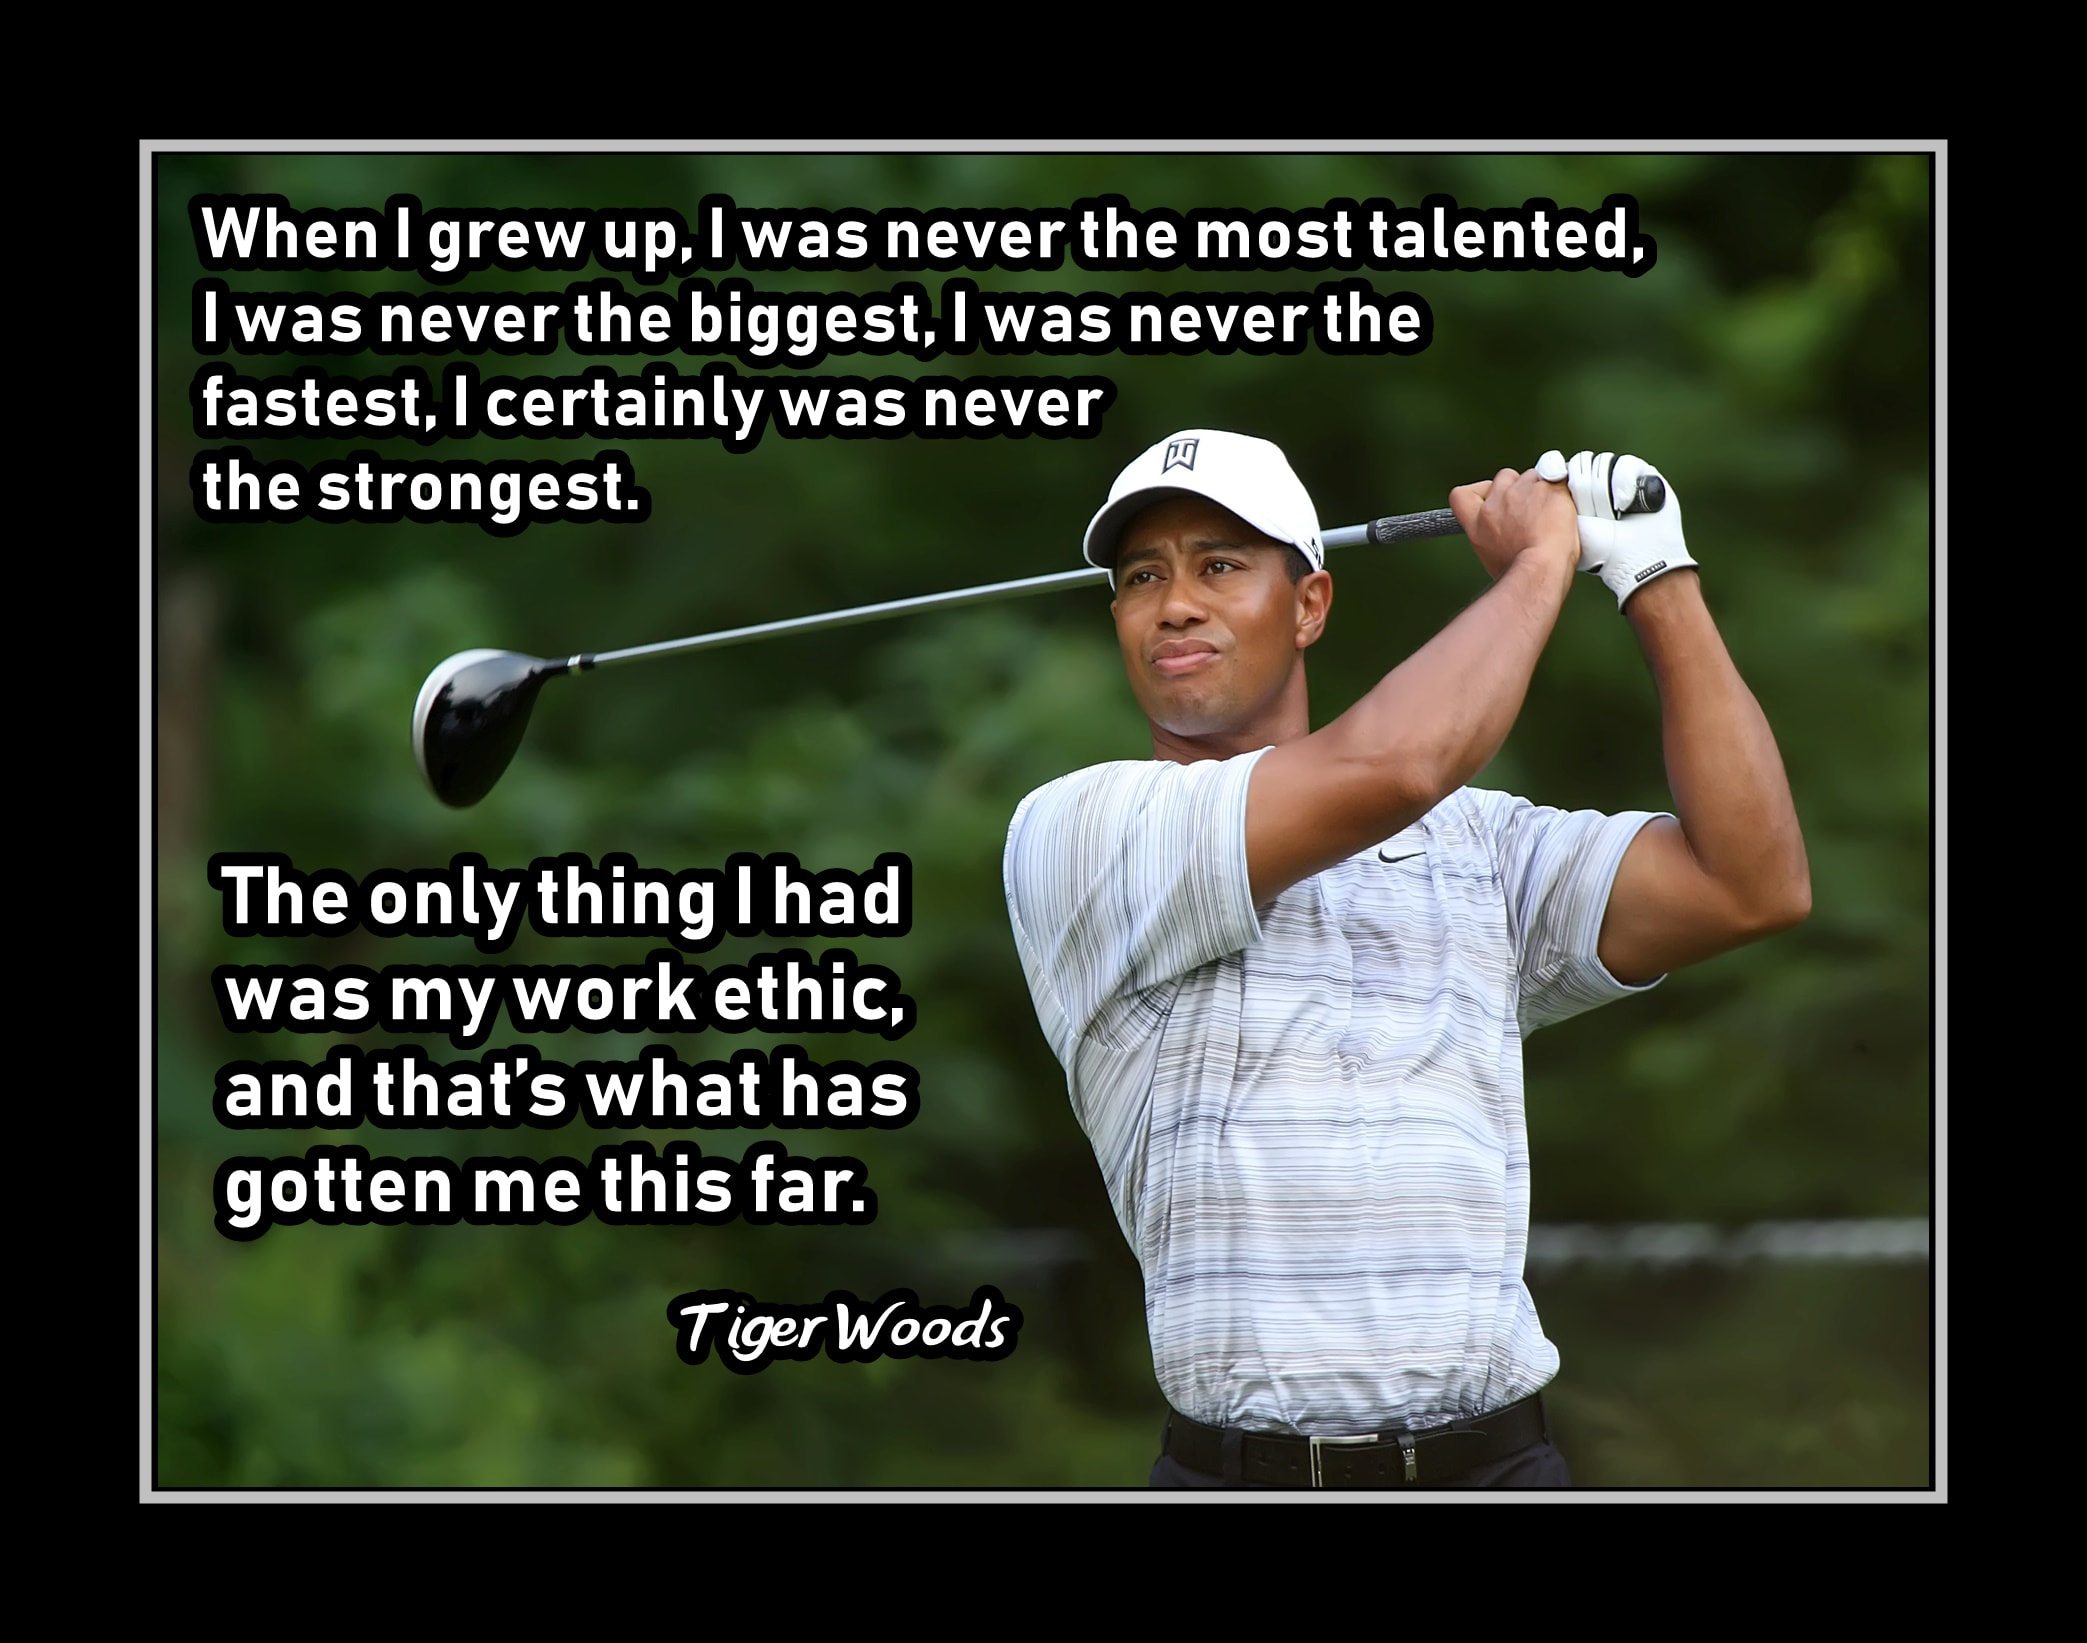 printable-tiger-woods-work-ethic-golf-quote-digital-print-poster